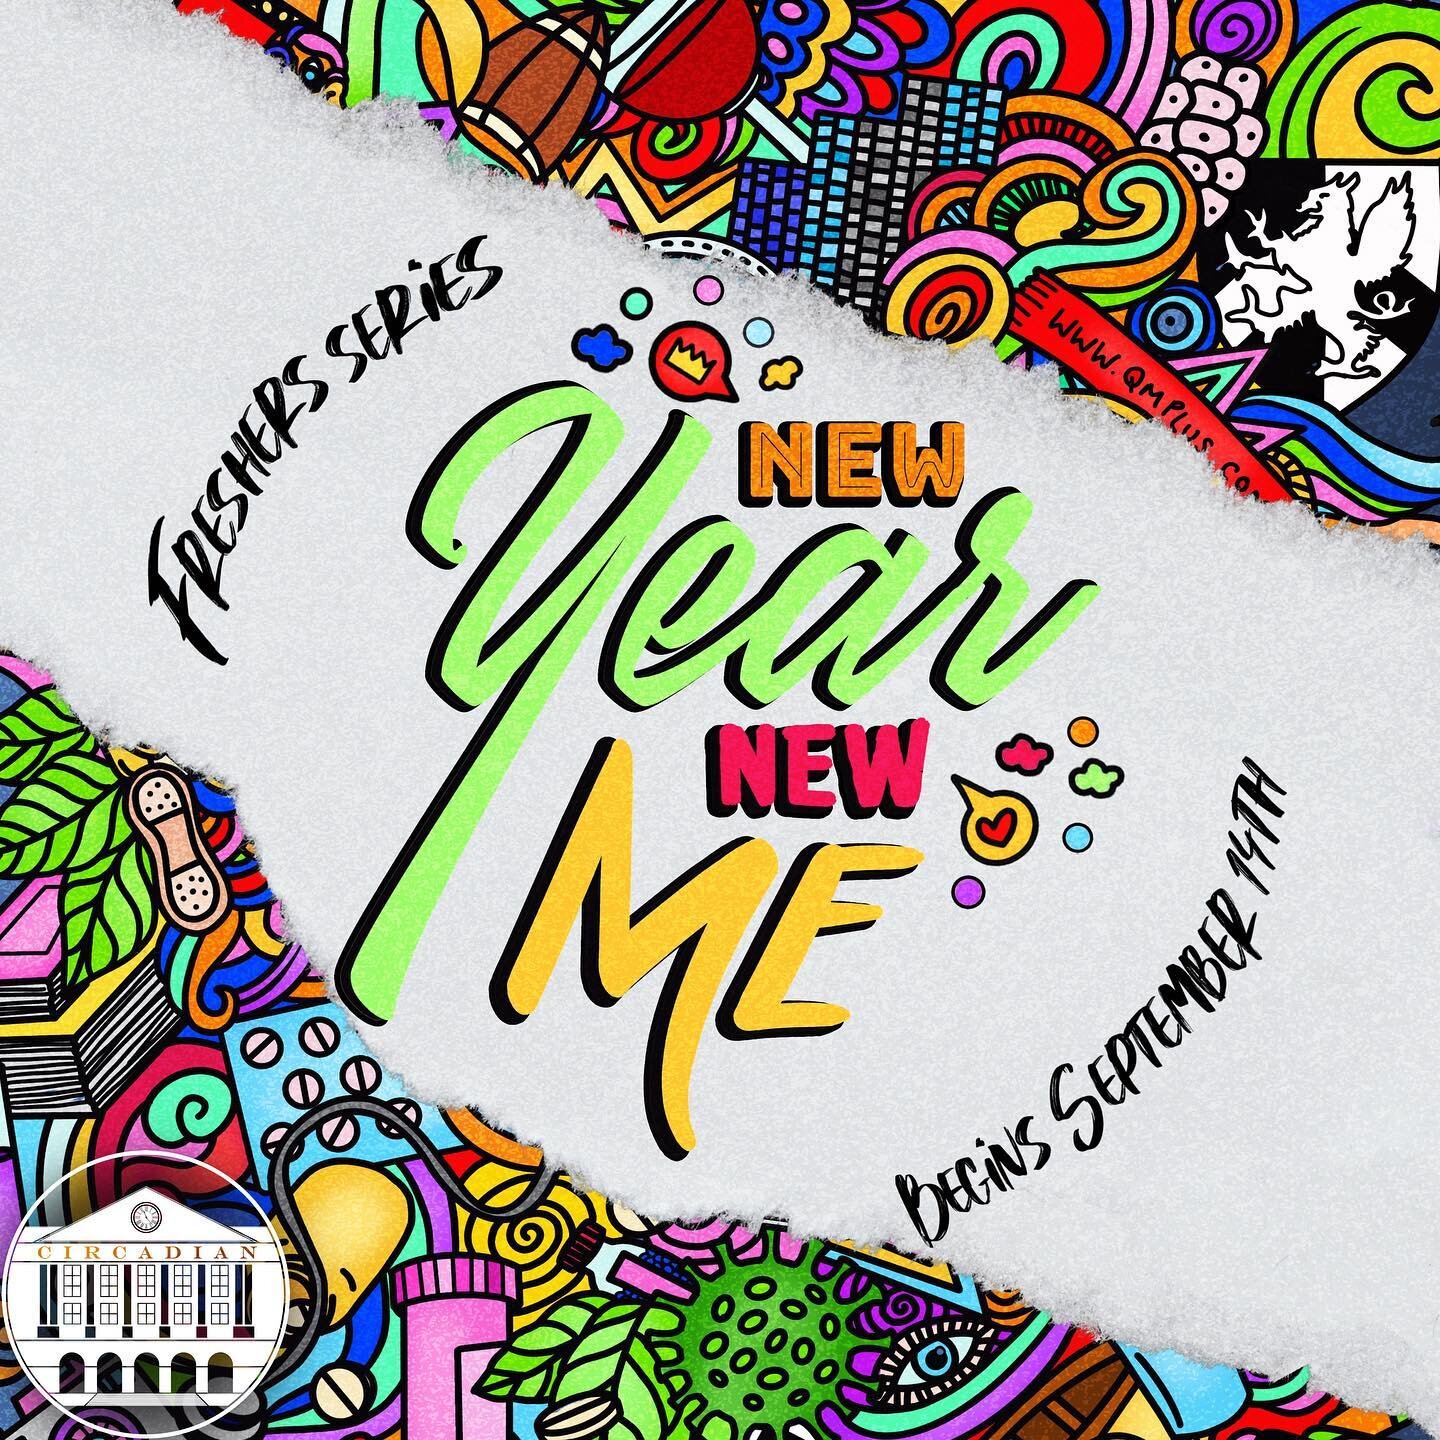 Our highly anticipated Freshers series &lsquo;New Year New Me&rsquo; launches on our website on Monday September 14th! 
Our talented editors and writers have been working hard to produce a range of entertaining articles for you all, ready for your lo